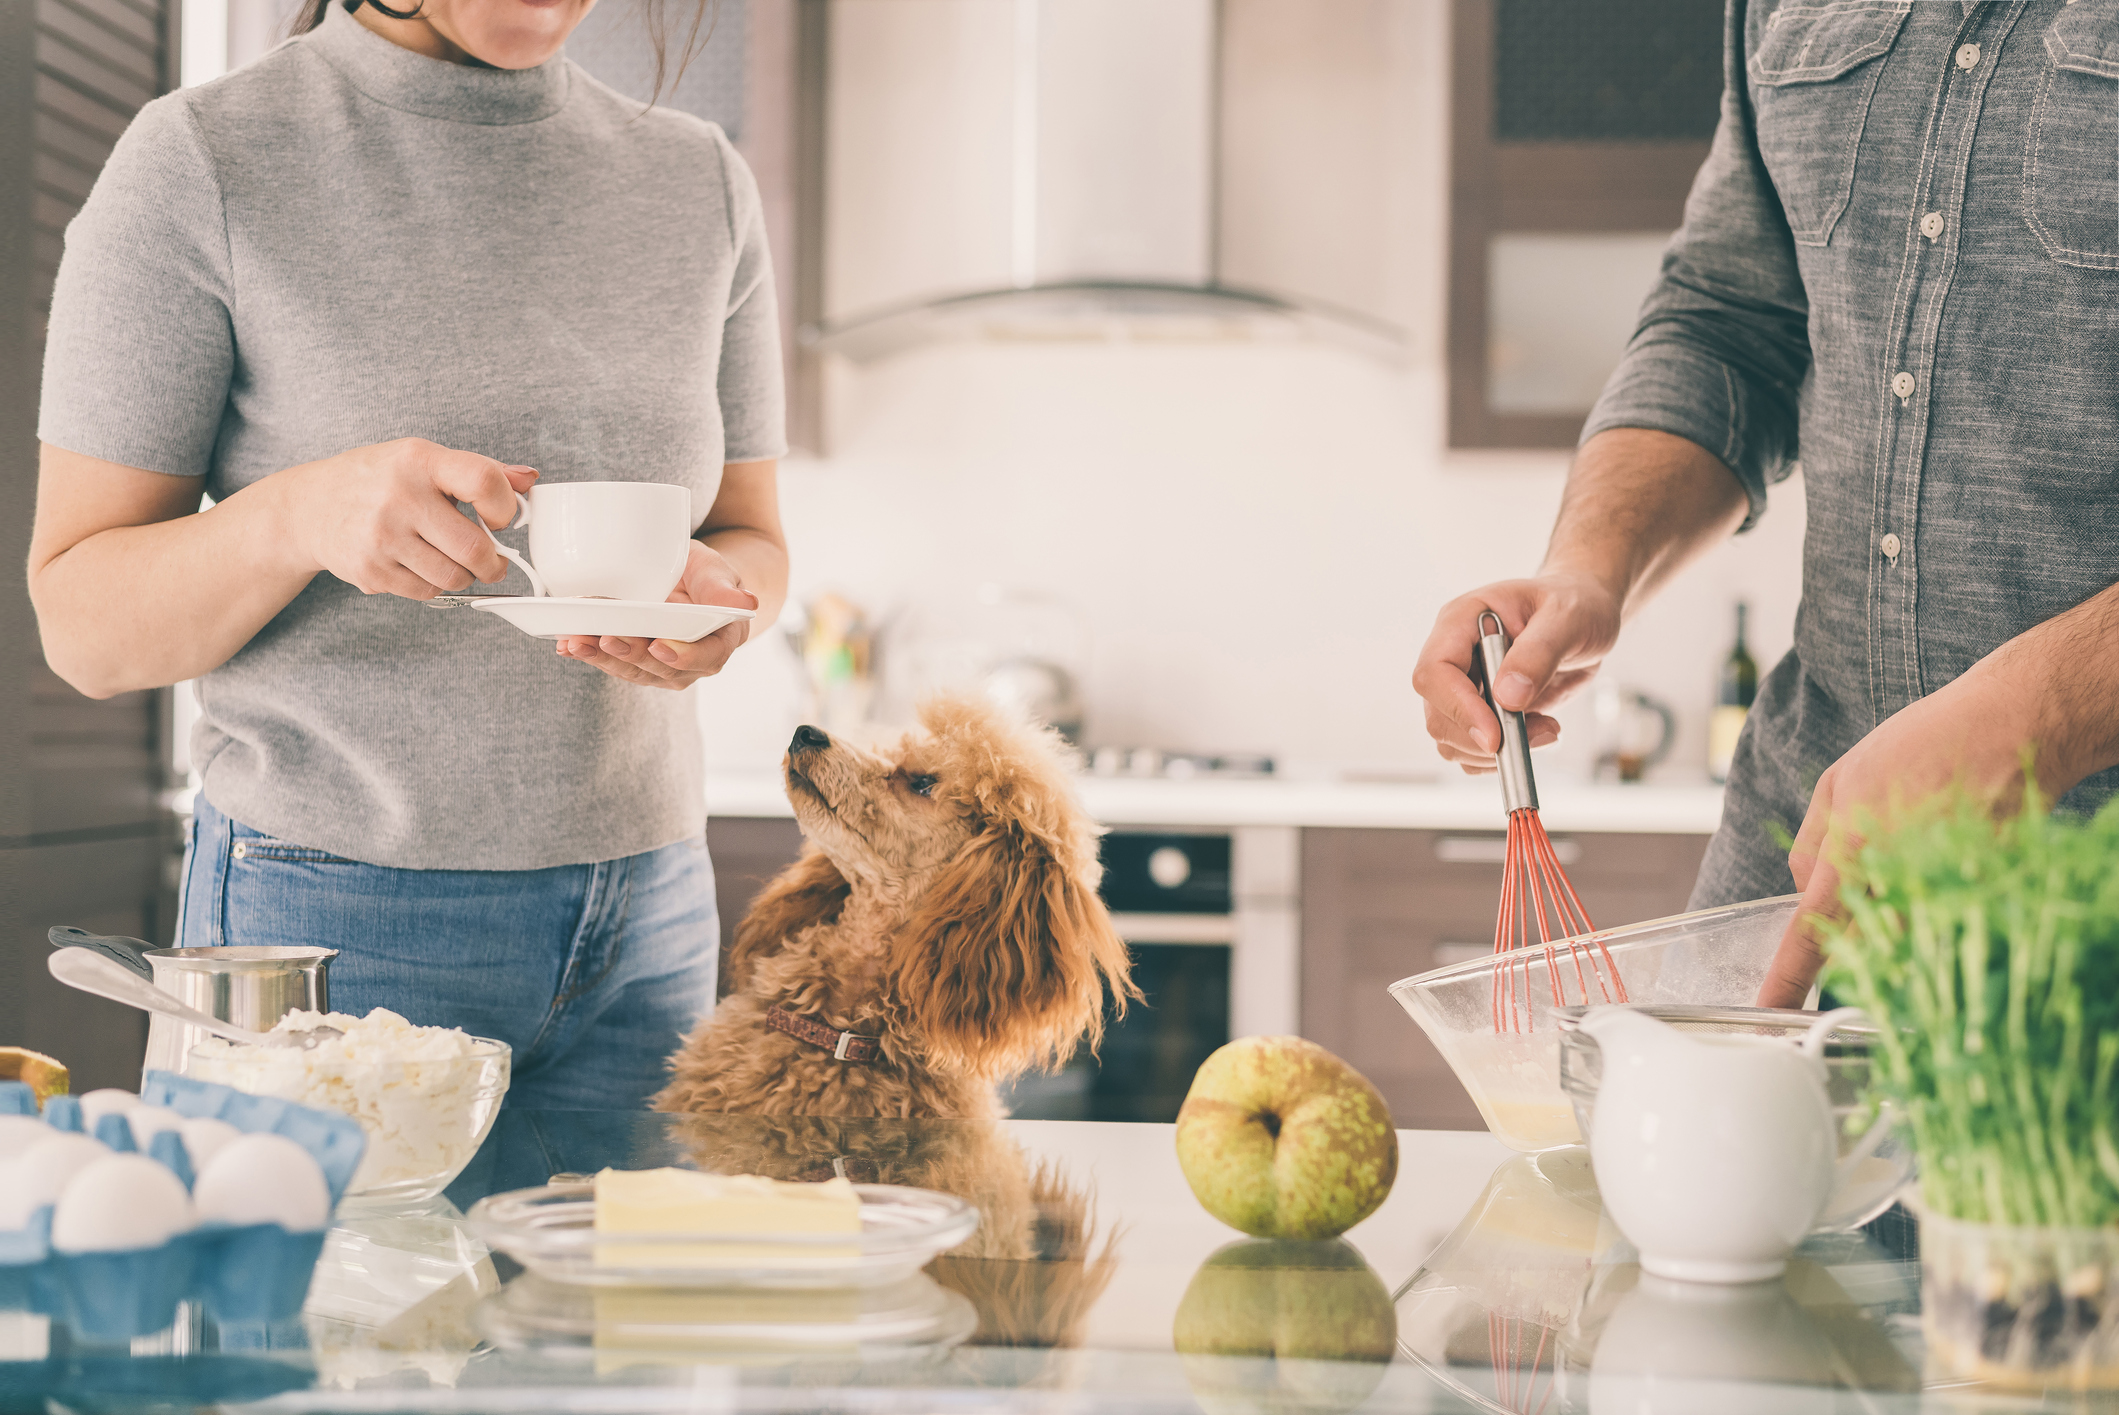 Couple with dog is making breakfast .